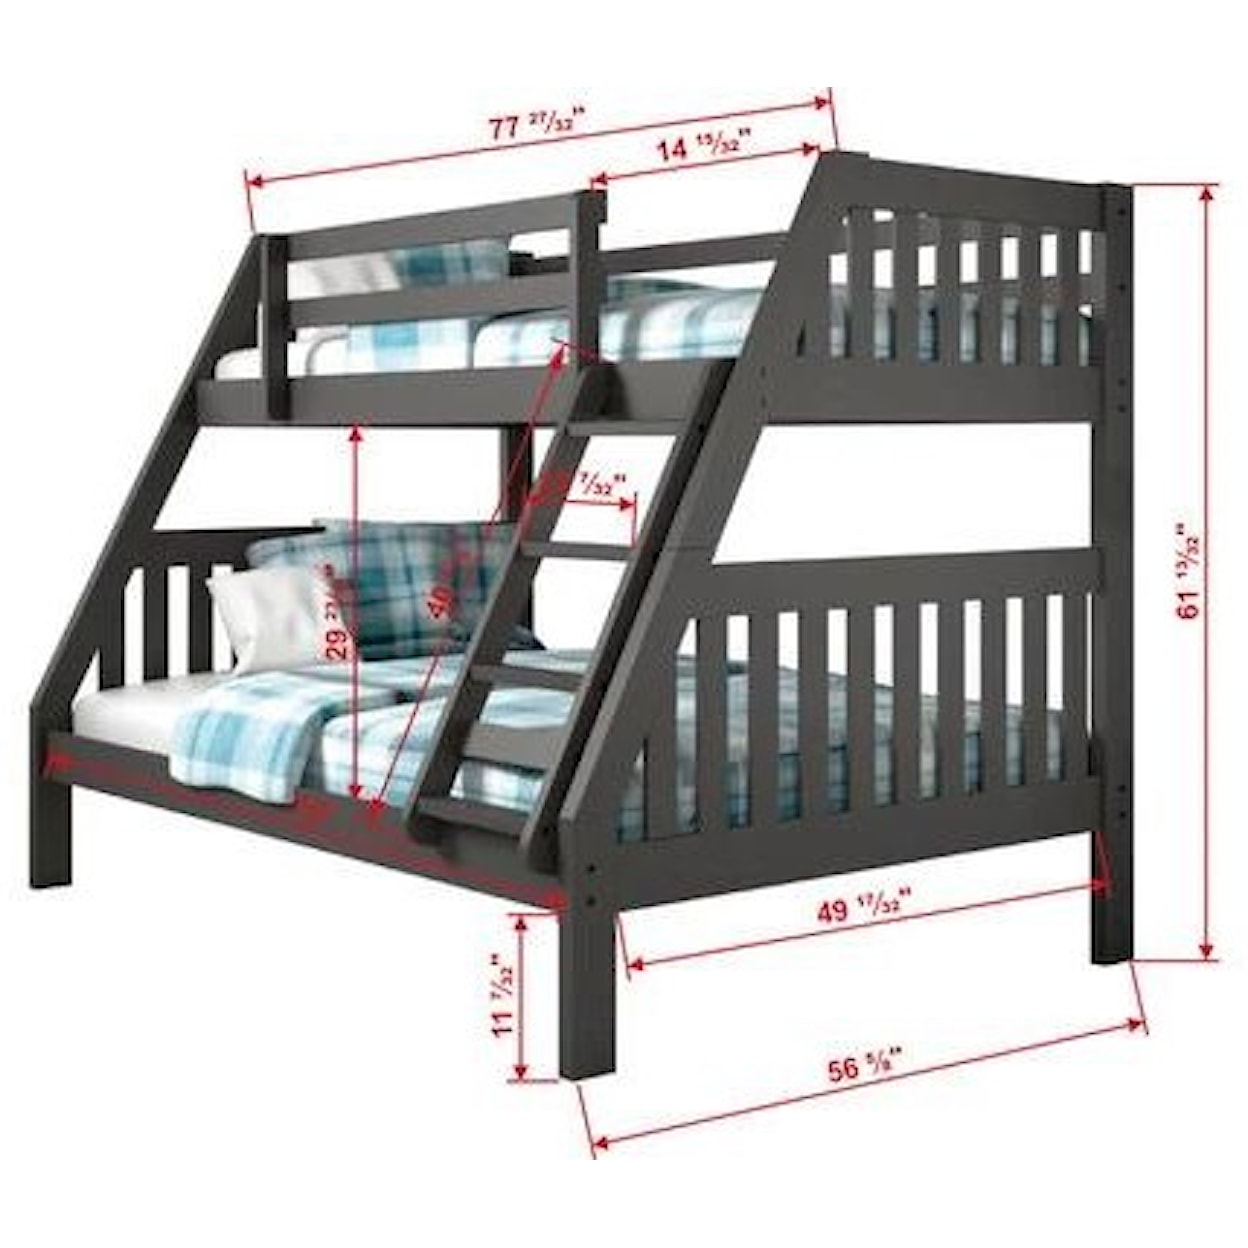 Canal House Bunk Beds White Twin Full Misson Bunk